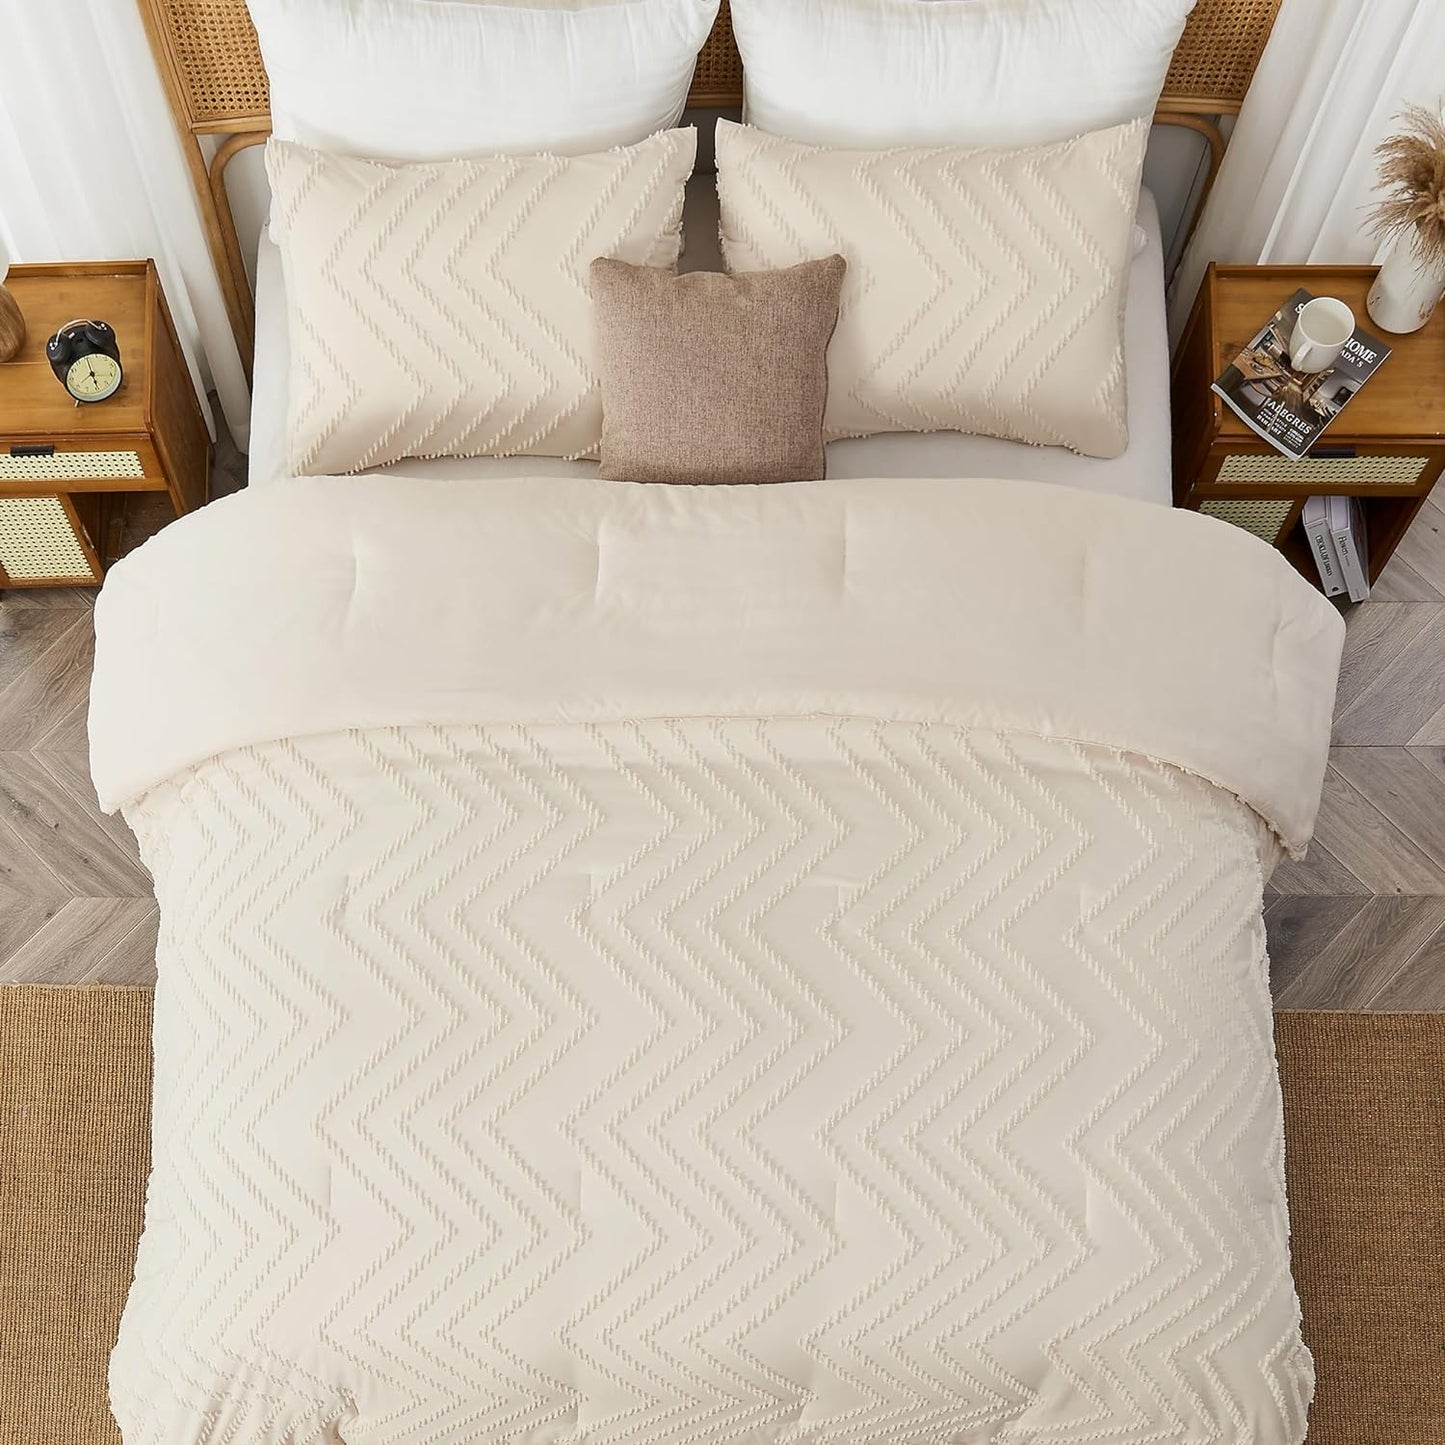 Full Size Comforter Sets, Beige Boho Cream Soft Warm Tufted Neutral Bedding Comforter Sets for Full Size Bed, 3 Pieces Aesthetic Chevron Farmhouse Cute Bohemian Textured Bedding Set